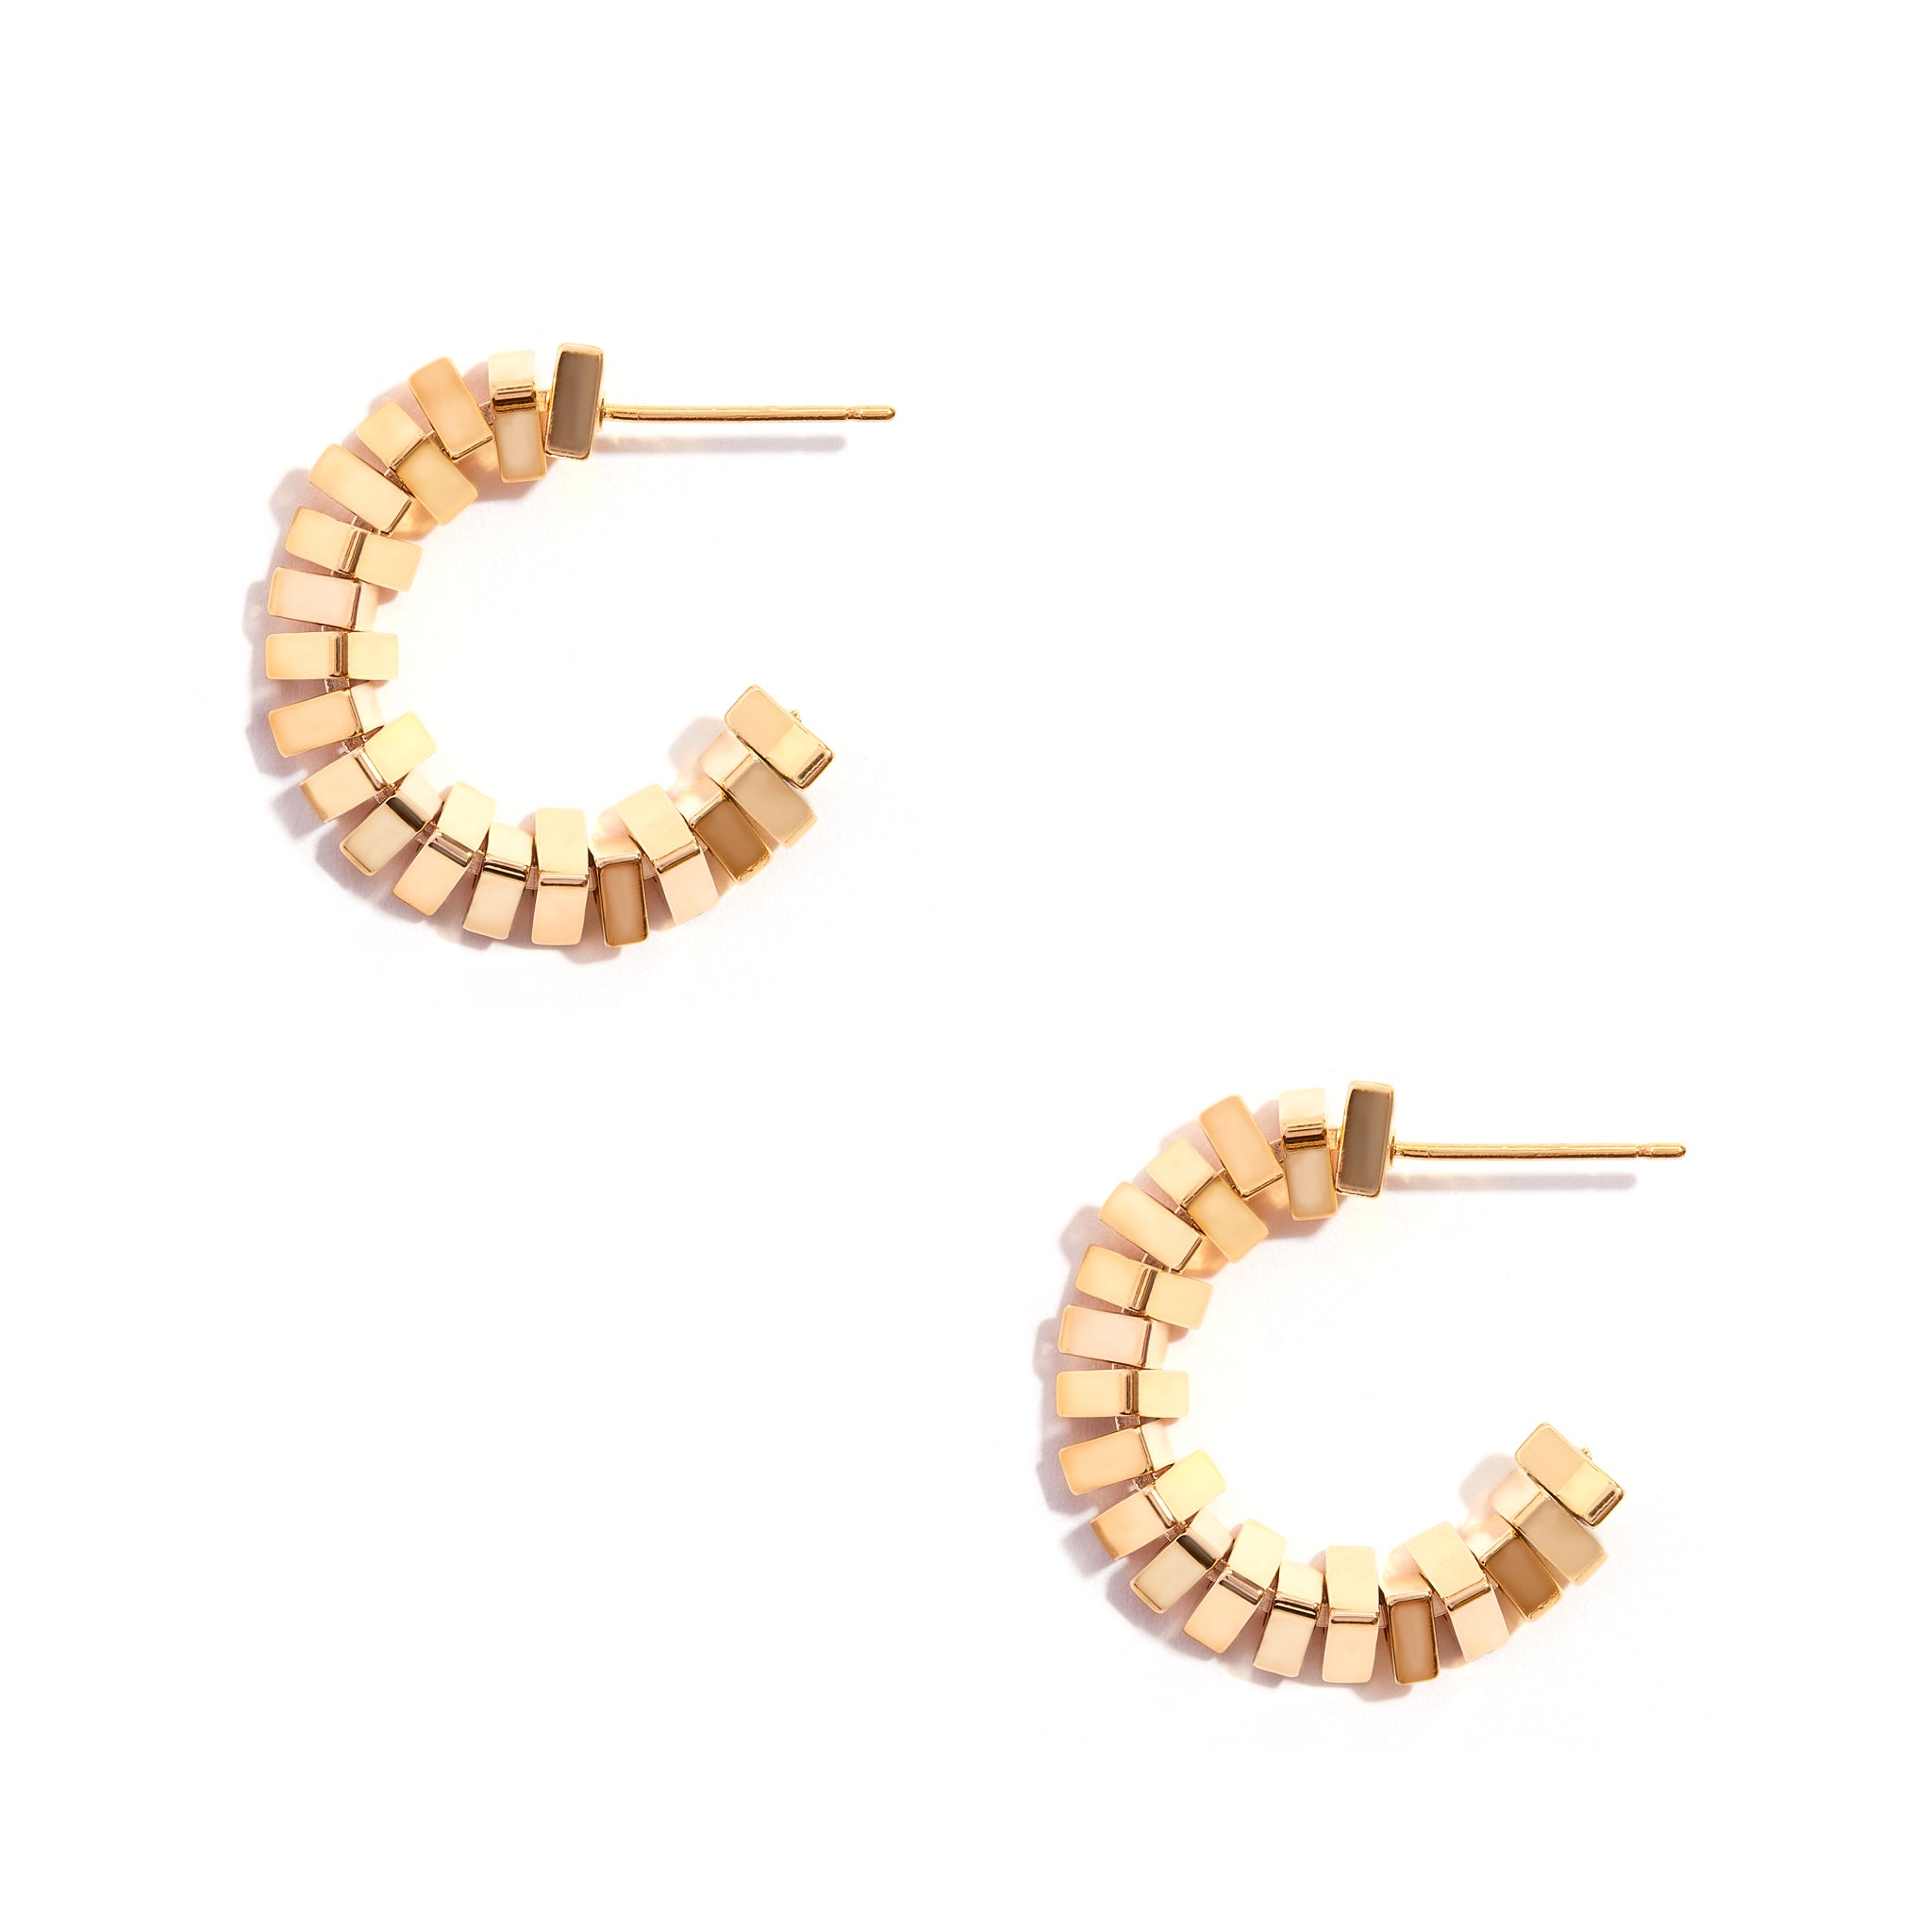 El texto alternativo (alt text) para estos aretes podría ser: "Stylish Triangle Beaded Hoop Earrings crafted from 14ct Gold Filled material, featuring a unique triangular design adorned with delicate beads. Add elegance and sophistication to your look. Suitable for both casual and formal occasions, making a statement wherever you go.